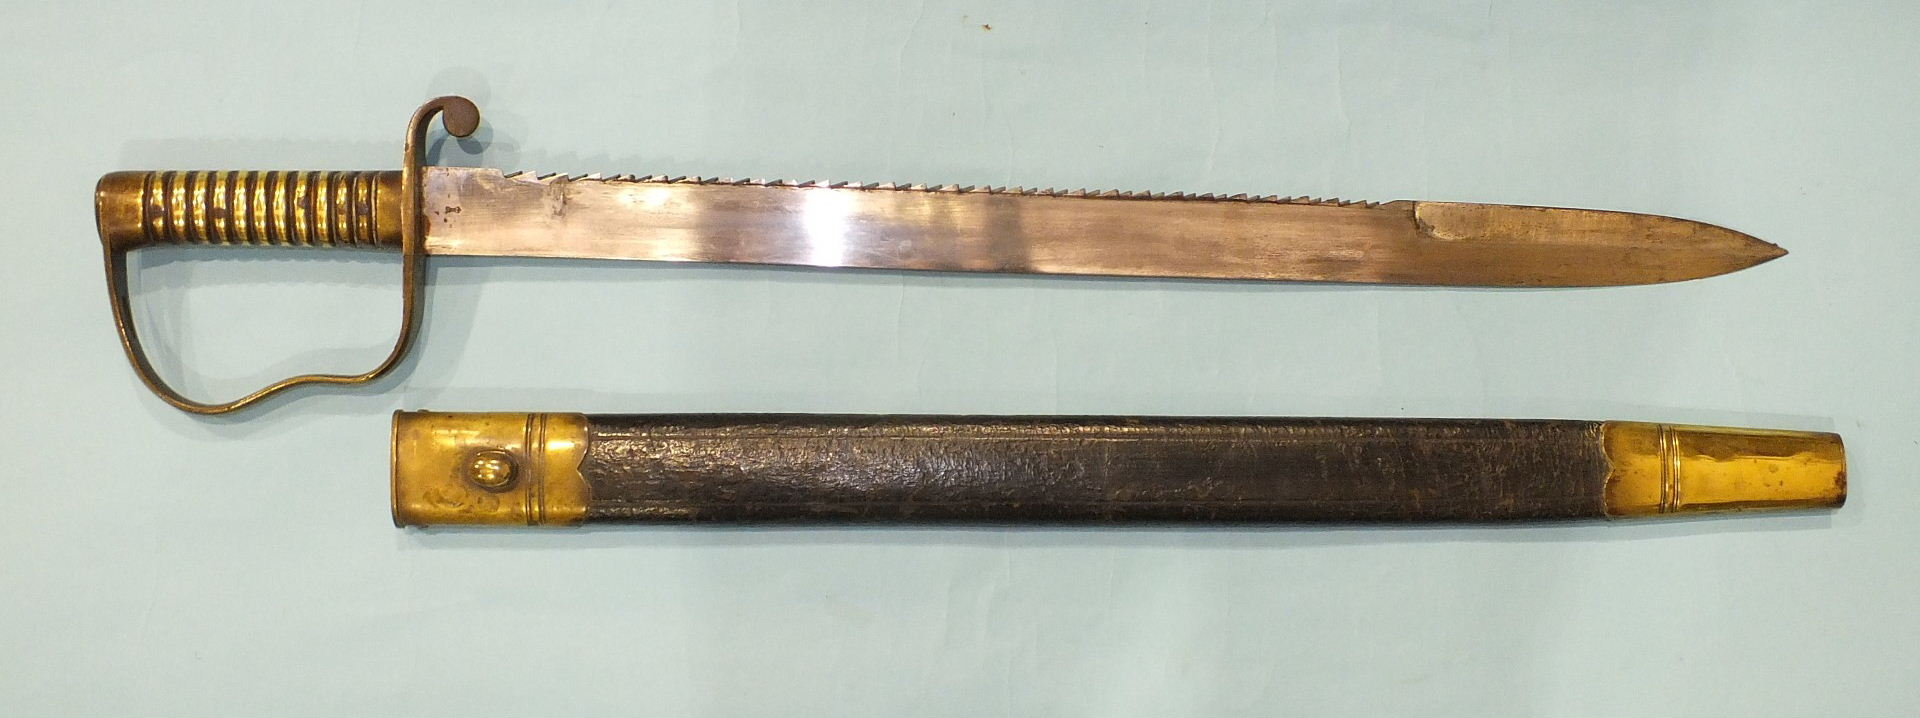 A British Pioneer sword with brass hilt and saw backed blade, 57cm, marked with crown over B21 and